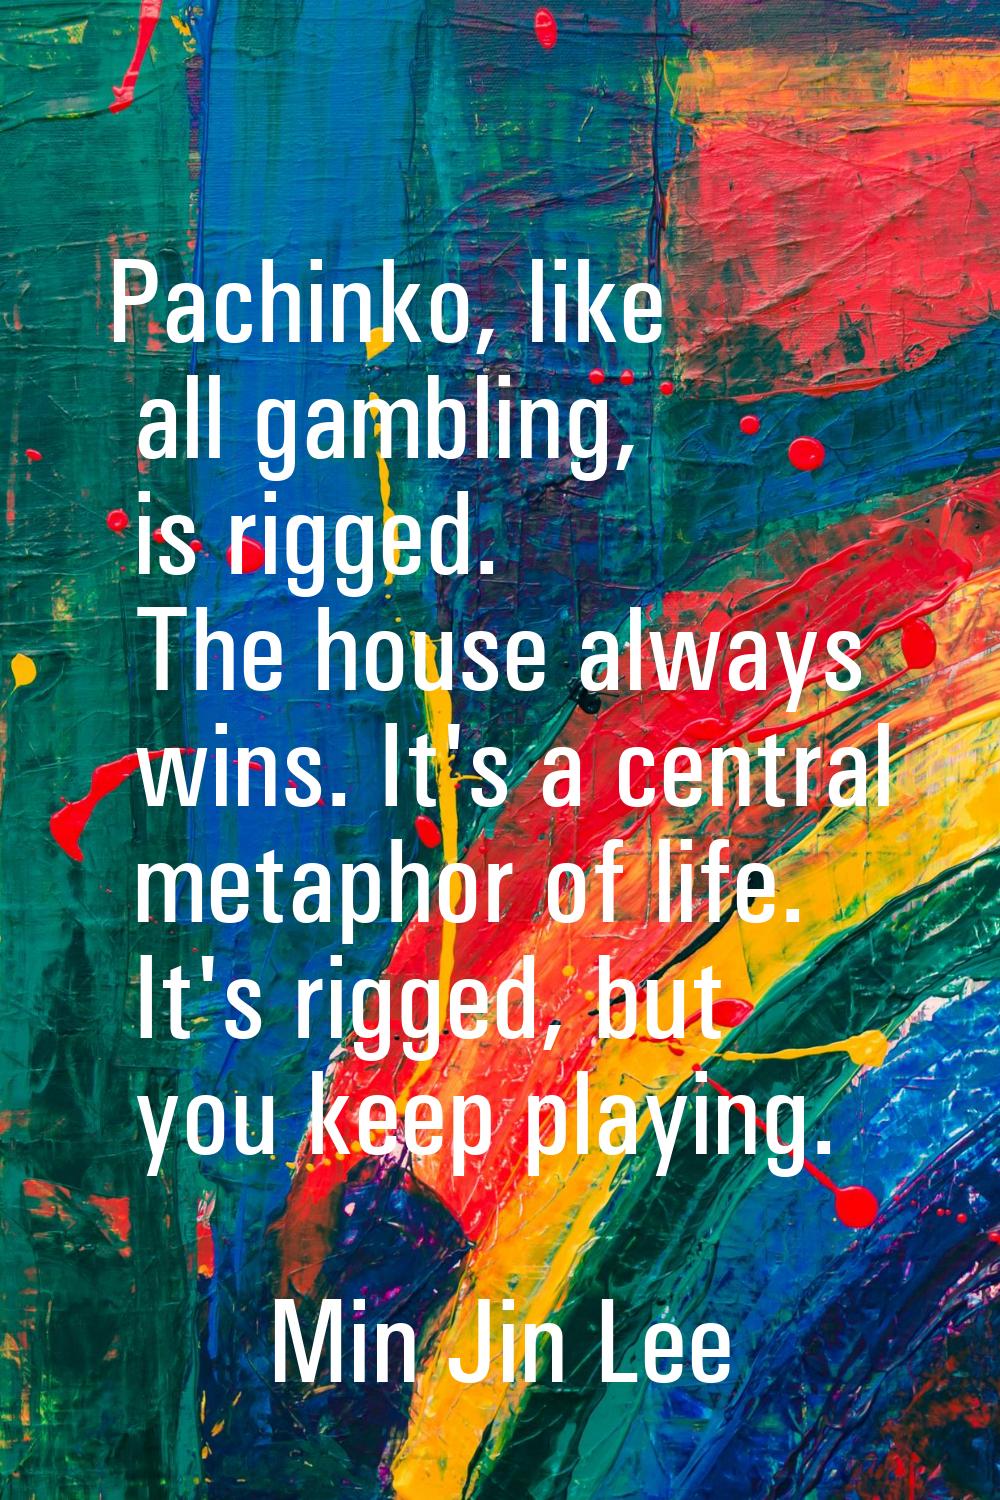 Pachinko, like all gambling, is rigged. The house always wins. It's a central metaphor of life. It'